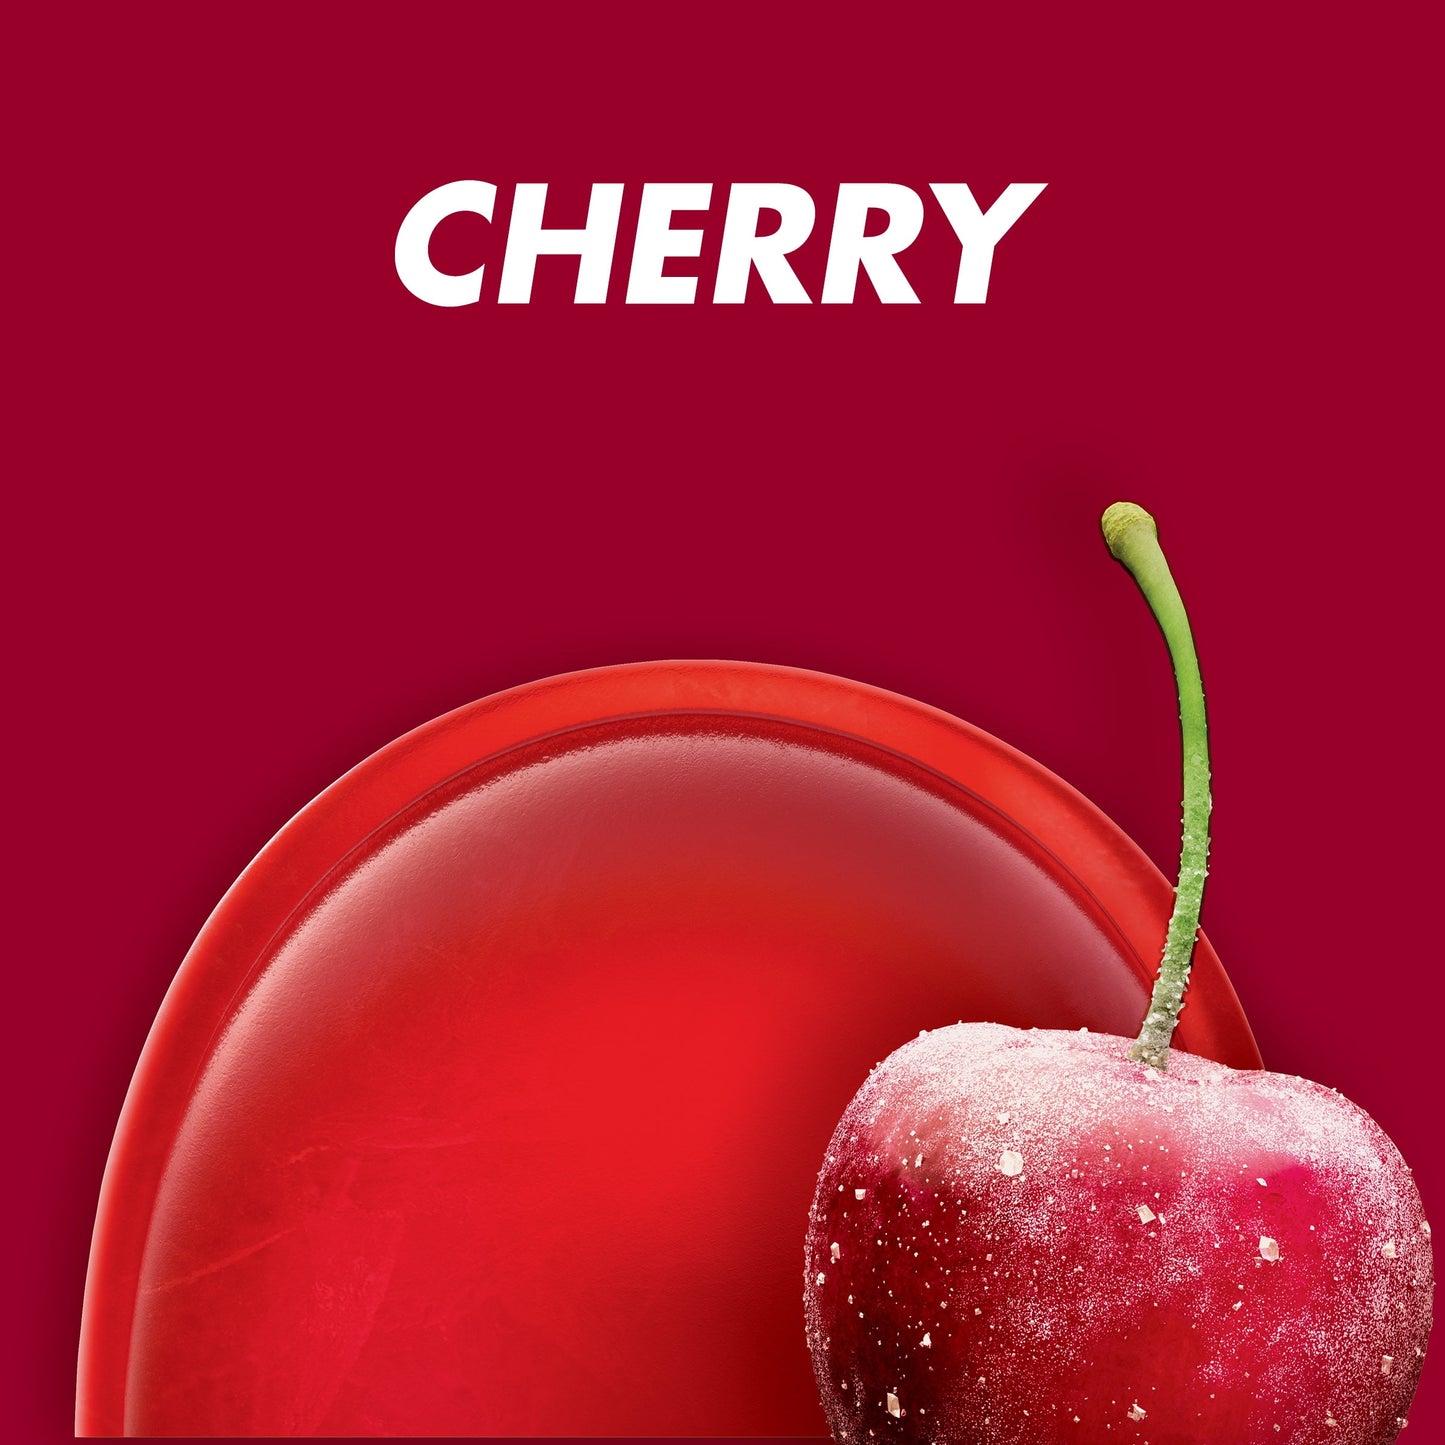 HALLS Relief Cherry Cough Drops, Economy Pack, 80 Drops